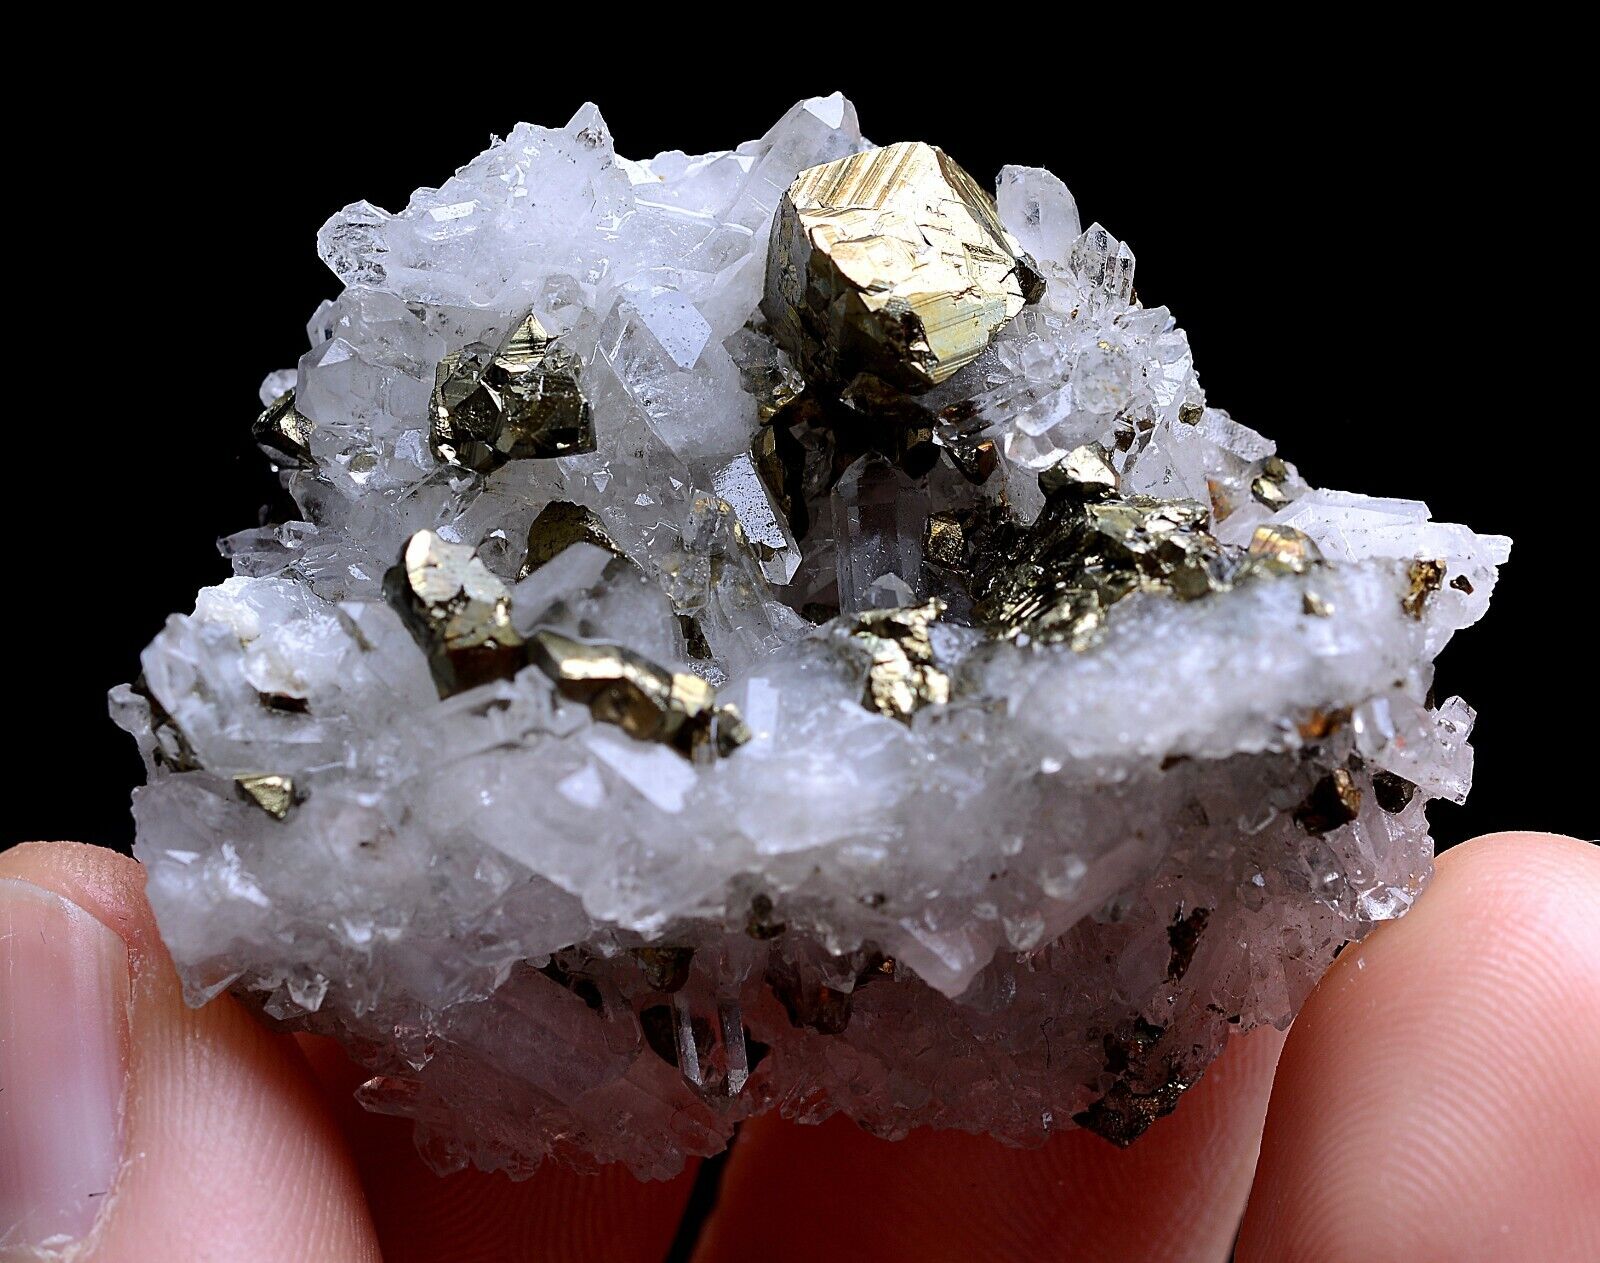 NEWLY DISCOVERED CRYSTAL CLUSTER & CHALCOPYRITE SYMBIOTIC MINERAL SAMPLES 22g